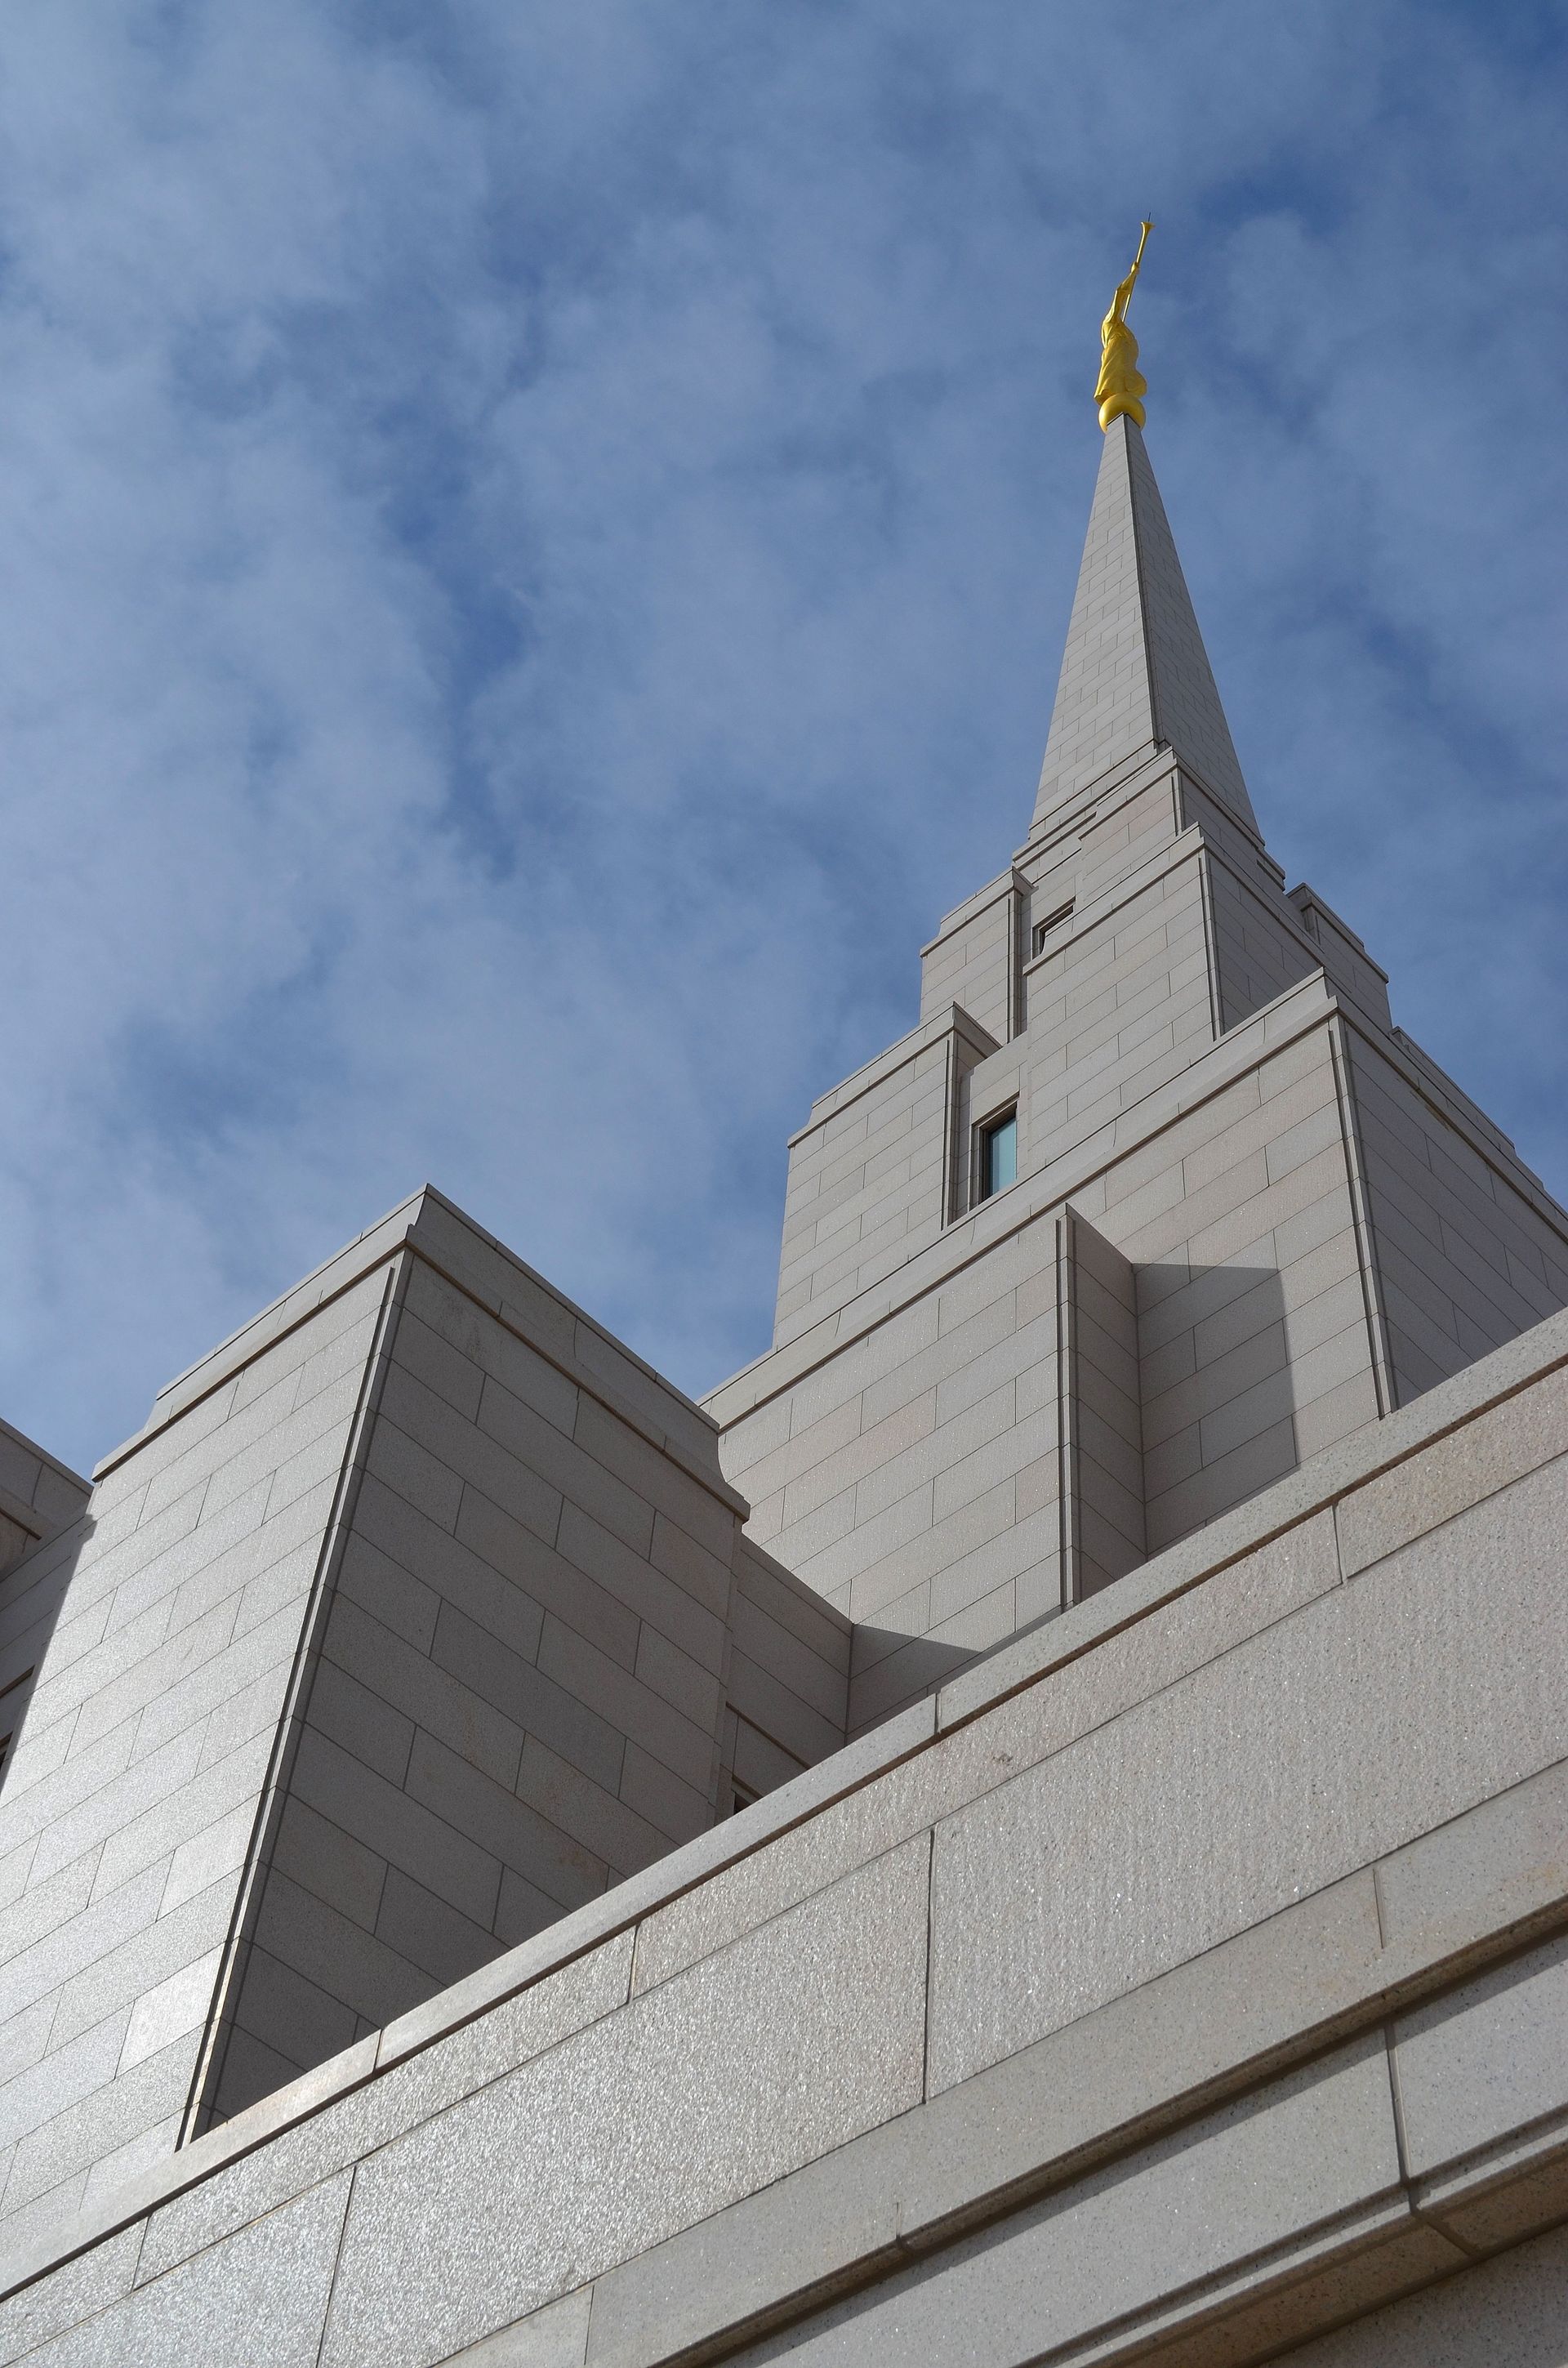 The Oquirrh Mountain Utah Temple spire, including the exterior of the temple.